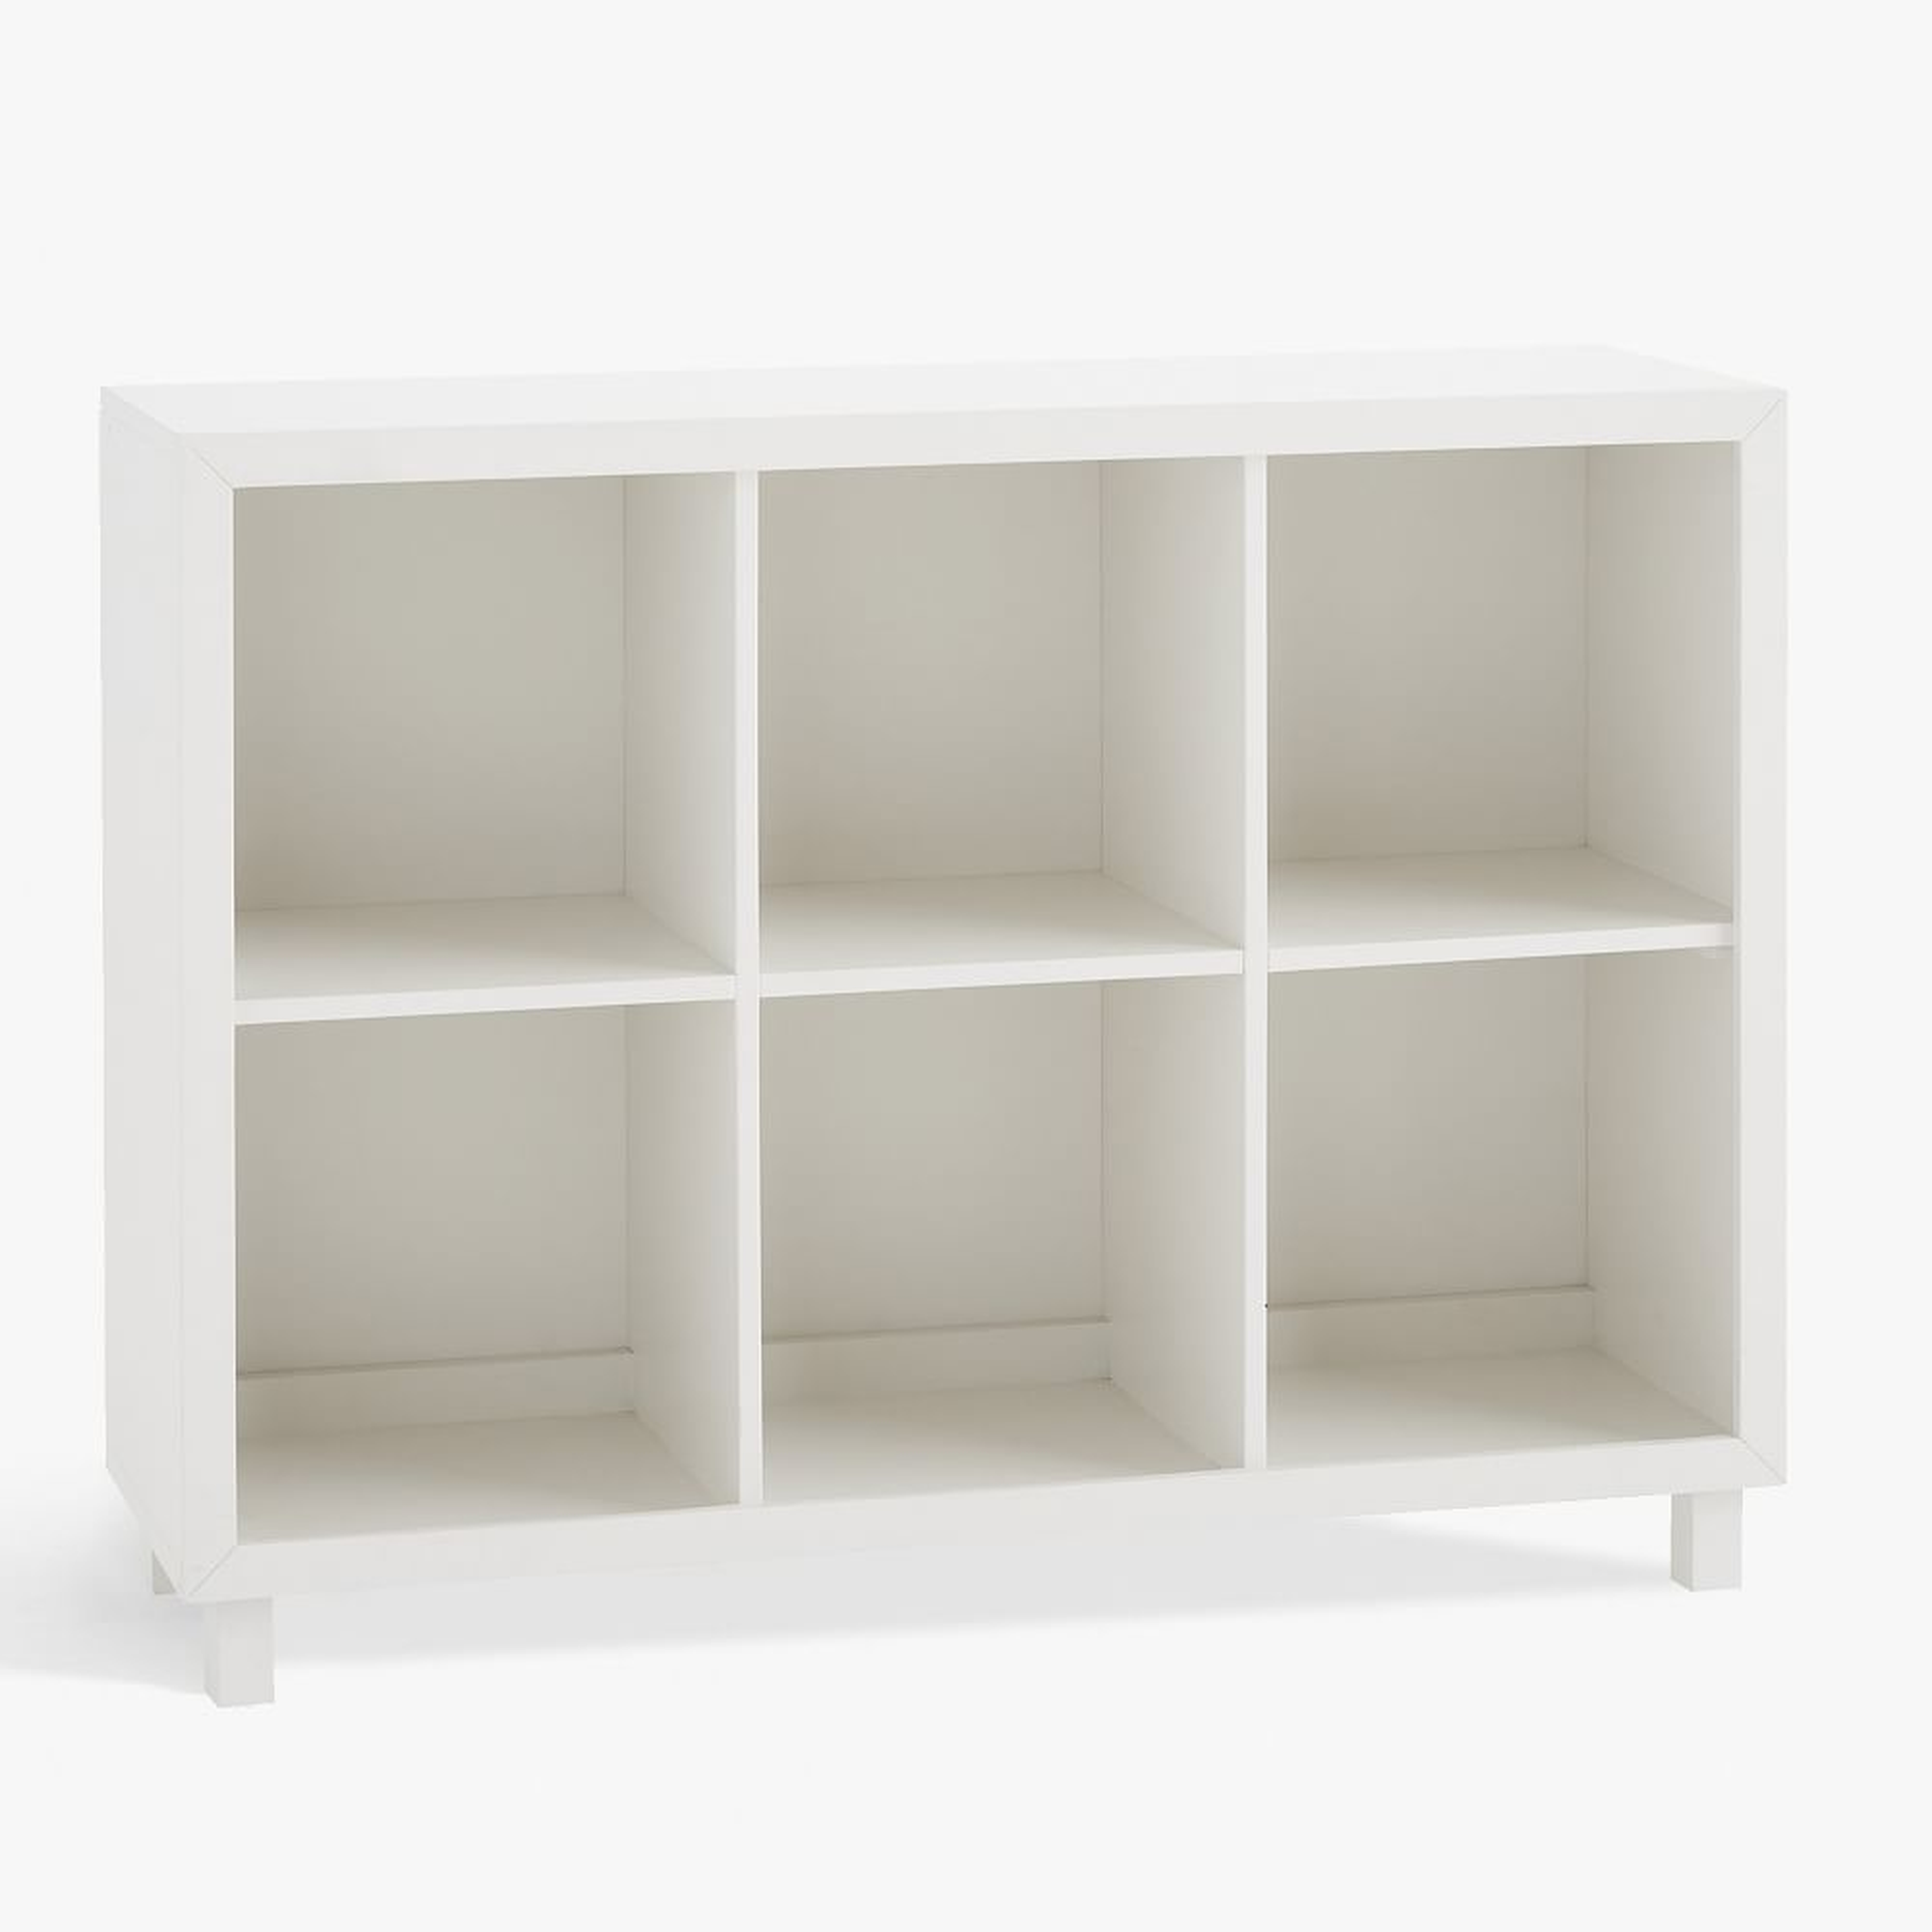 Horizontal Cubby Bookcase, 2x3, Simply White, WE Kids - West Elm